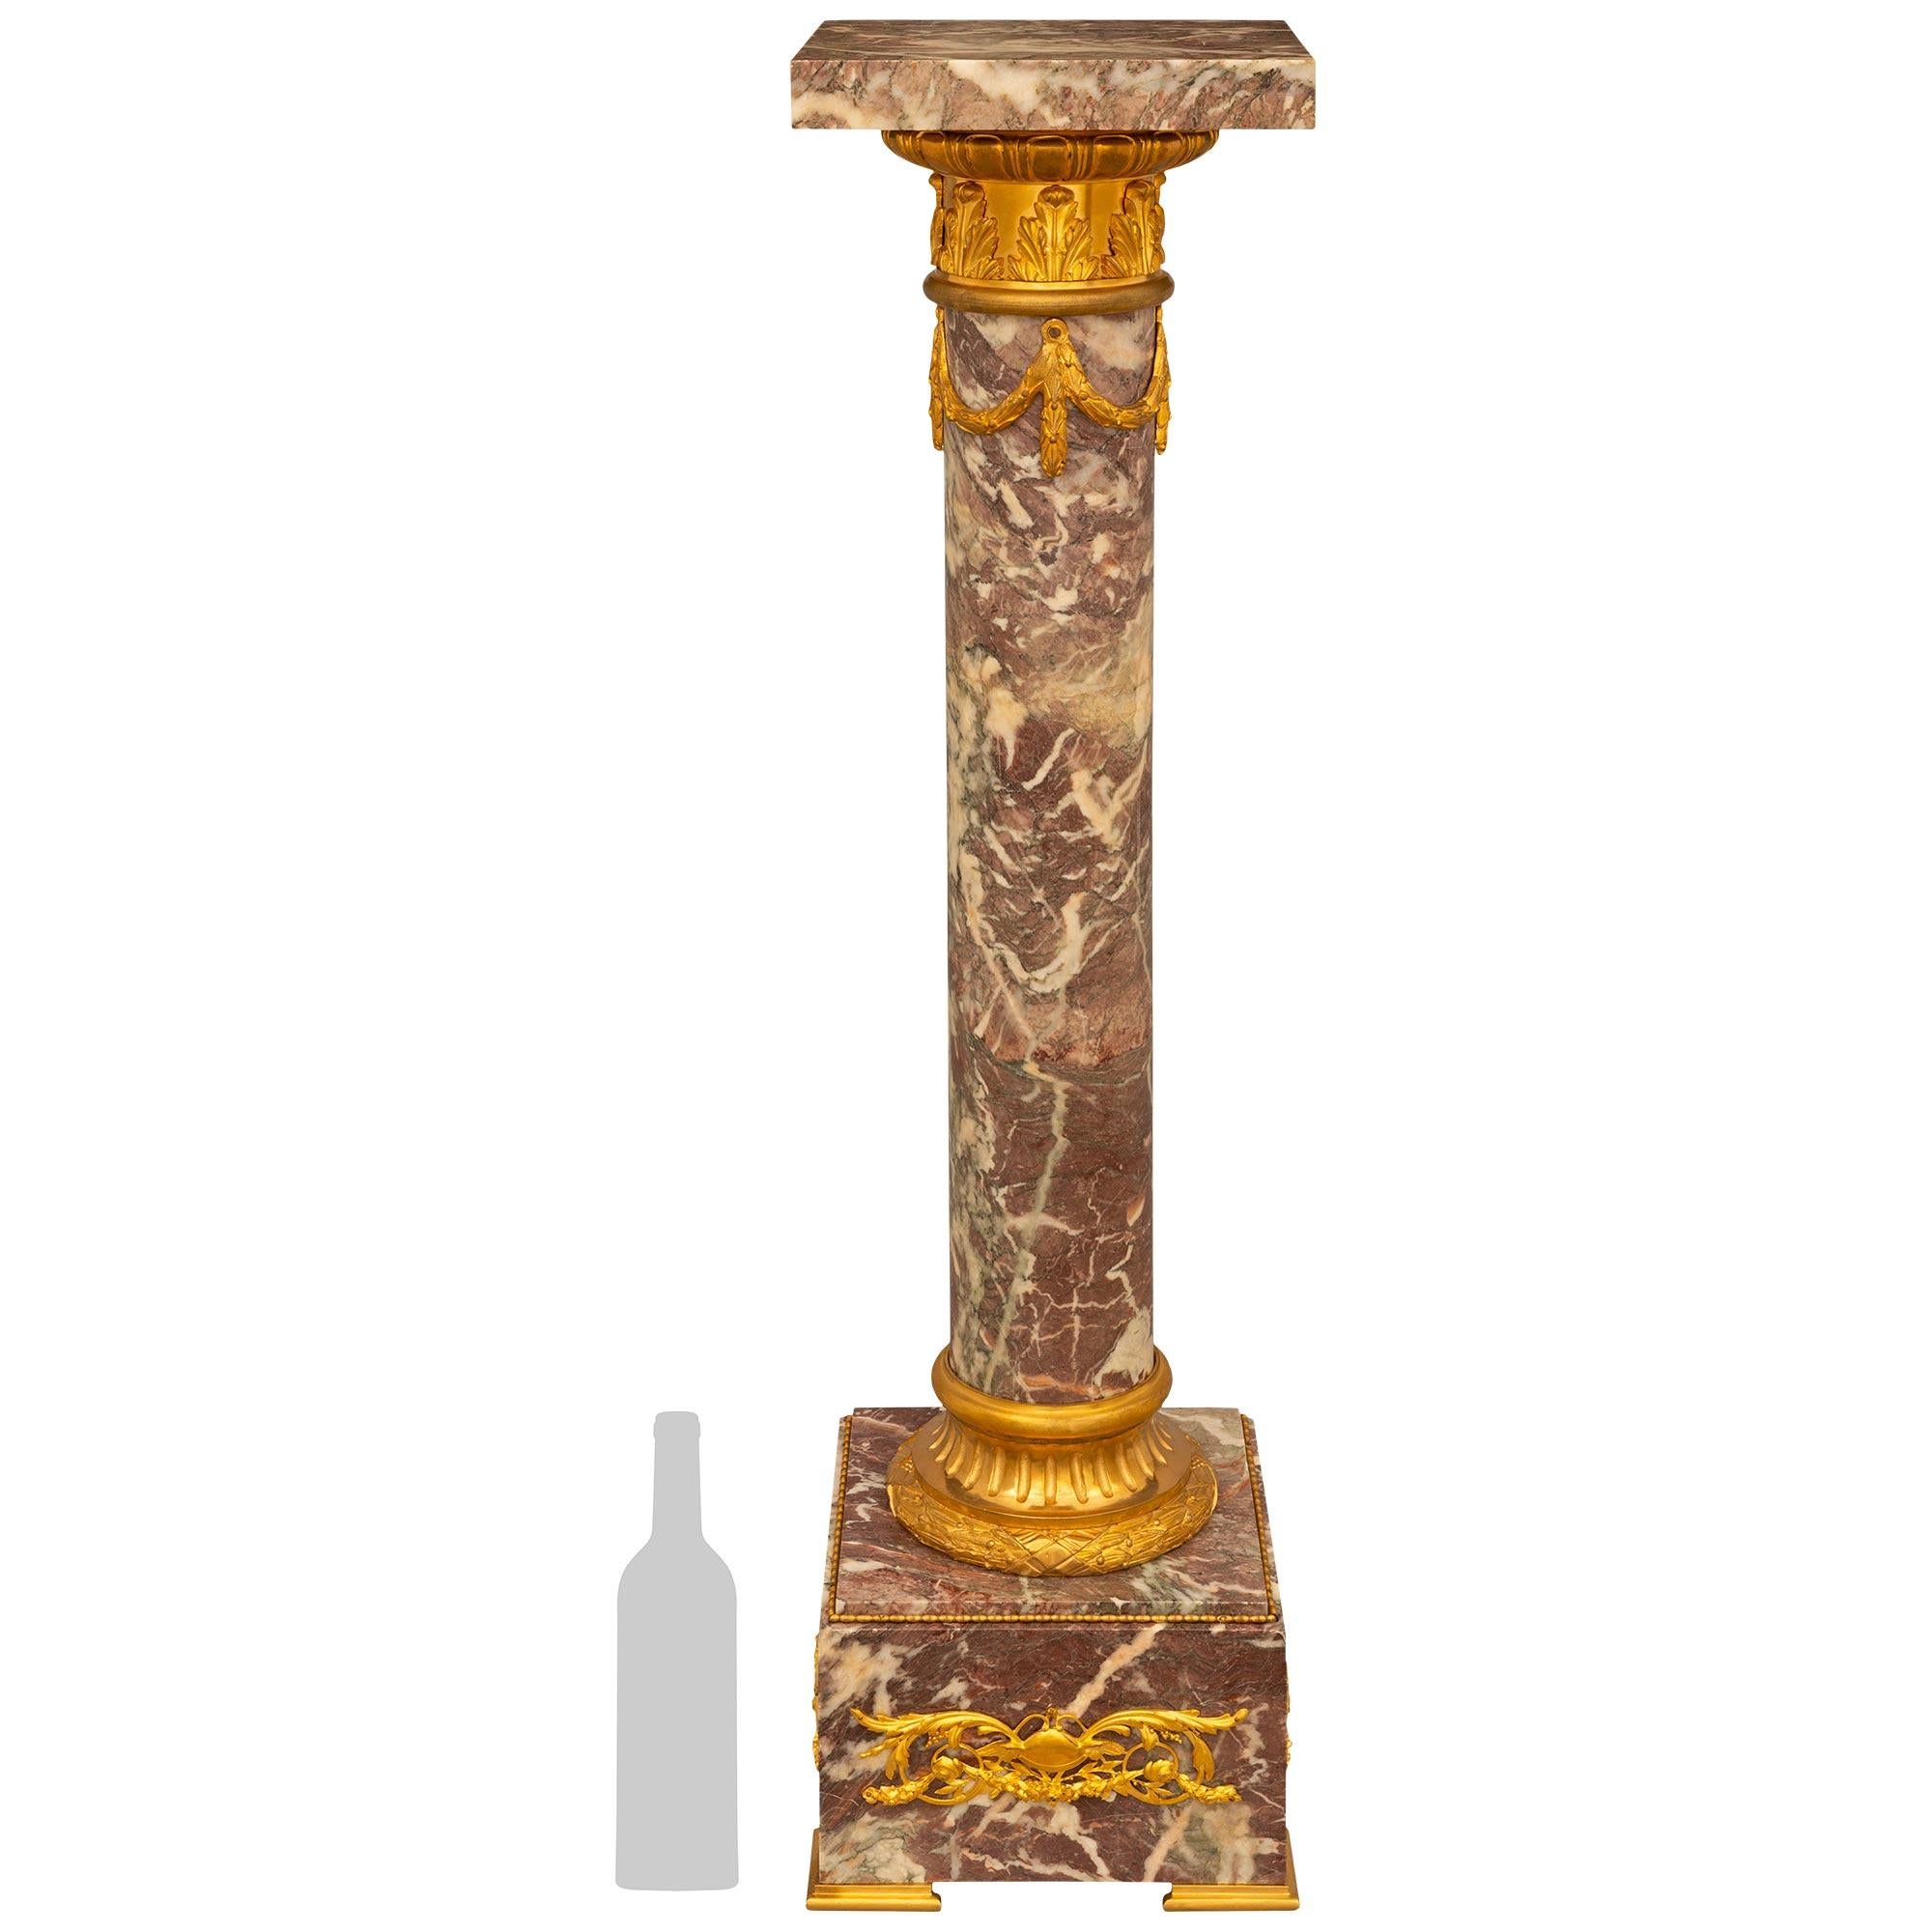 An extremely high quality French 19th century Louis XVI st. Fleur de Pêcher marble and Ormolu pedestal. This exquisitely decorative pedestal is raised on a square marble base with Ormolu feet and beaded borders, above and below pierced Ormolu mounts